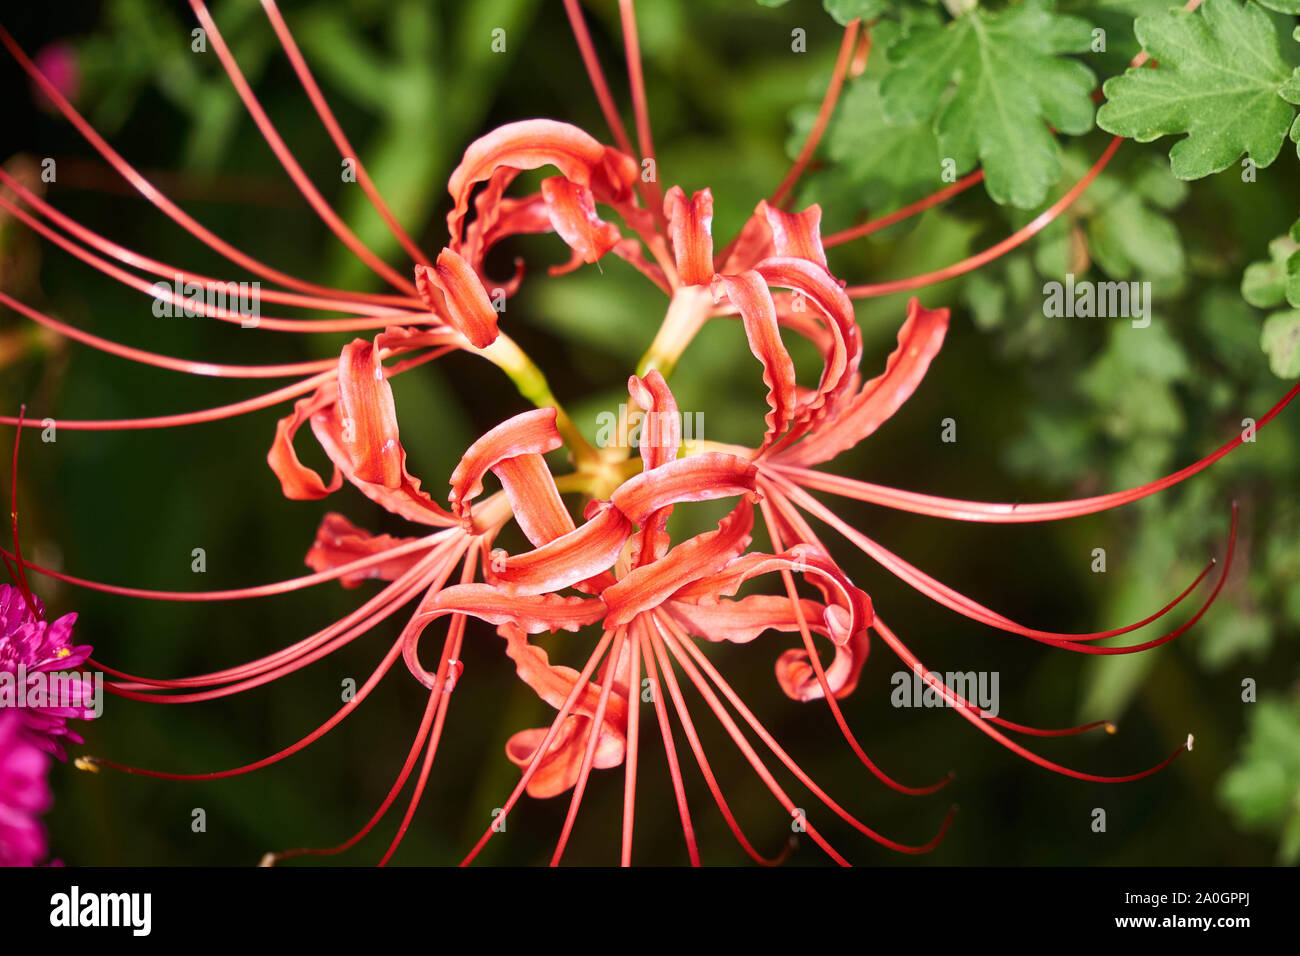 Lycoris radiata (red spider lily, hell flower, red magic lily, equinox flower, hurricane lily, or resurrection lily) flowers bloom in early autumn. Stock Photo